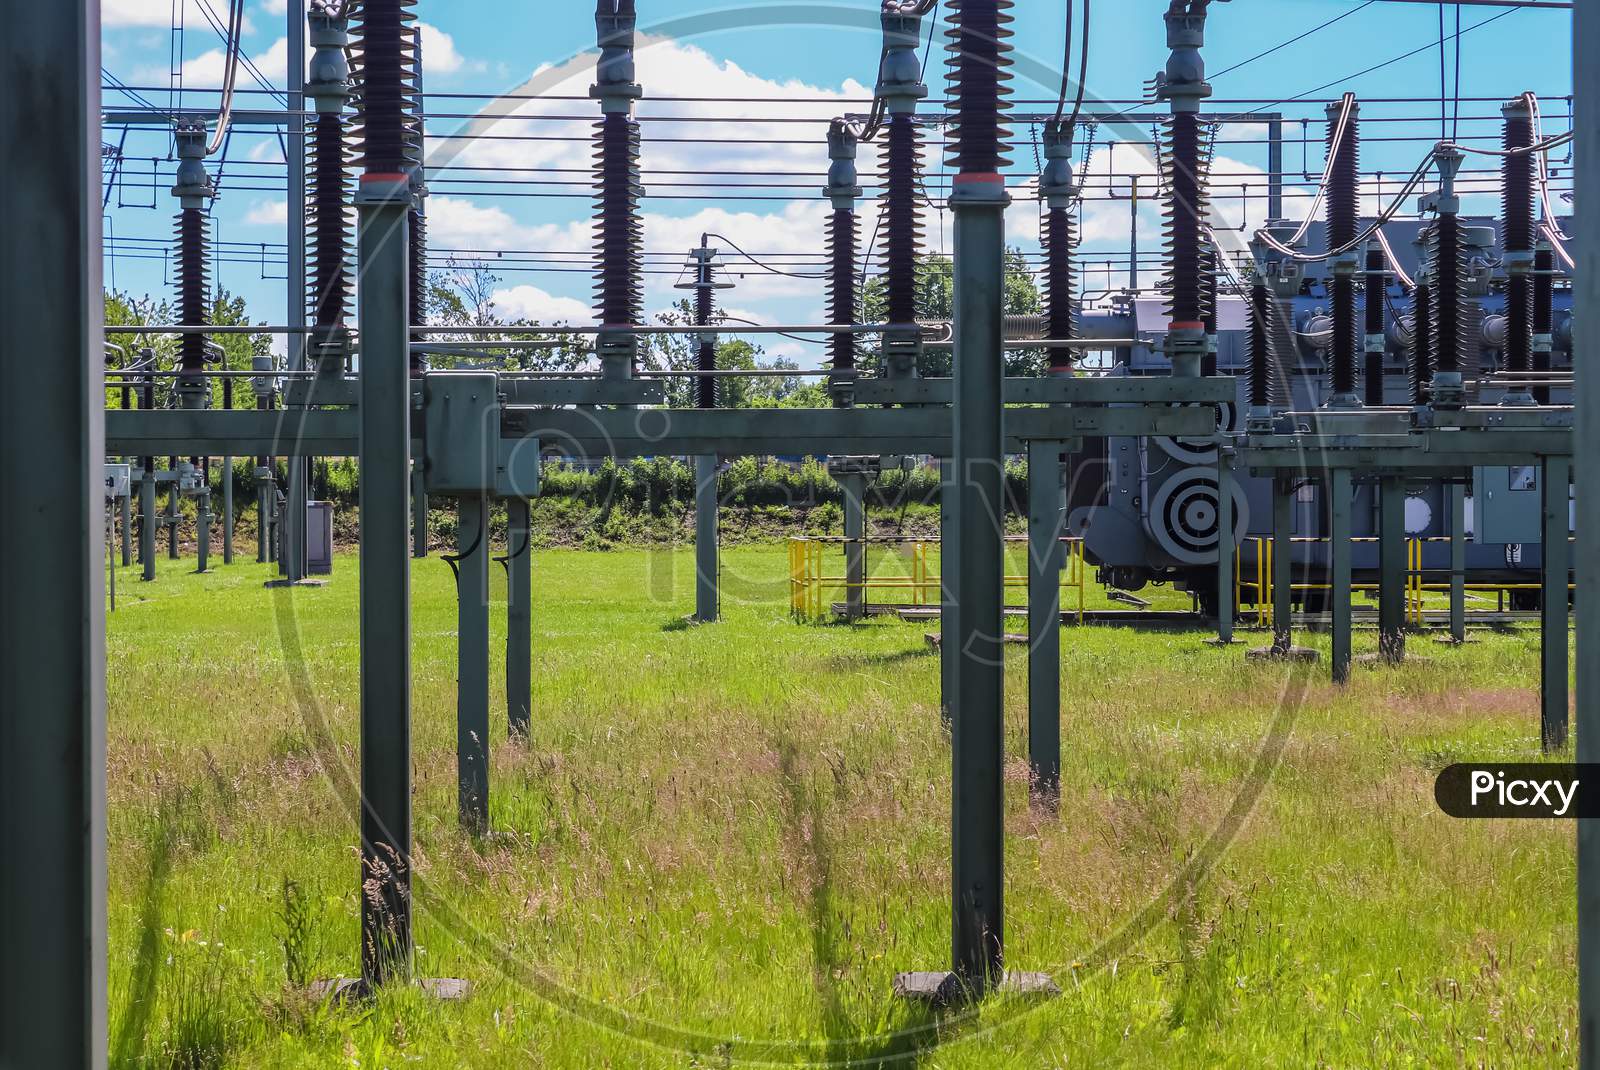 Electrical Transformer. Distribution Of Electric Energy At A Big Substation With Lots Power Lines On A Sunny Day